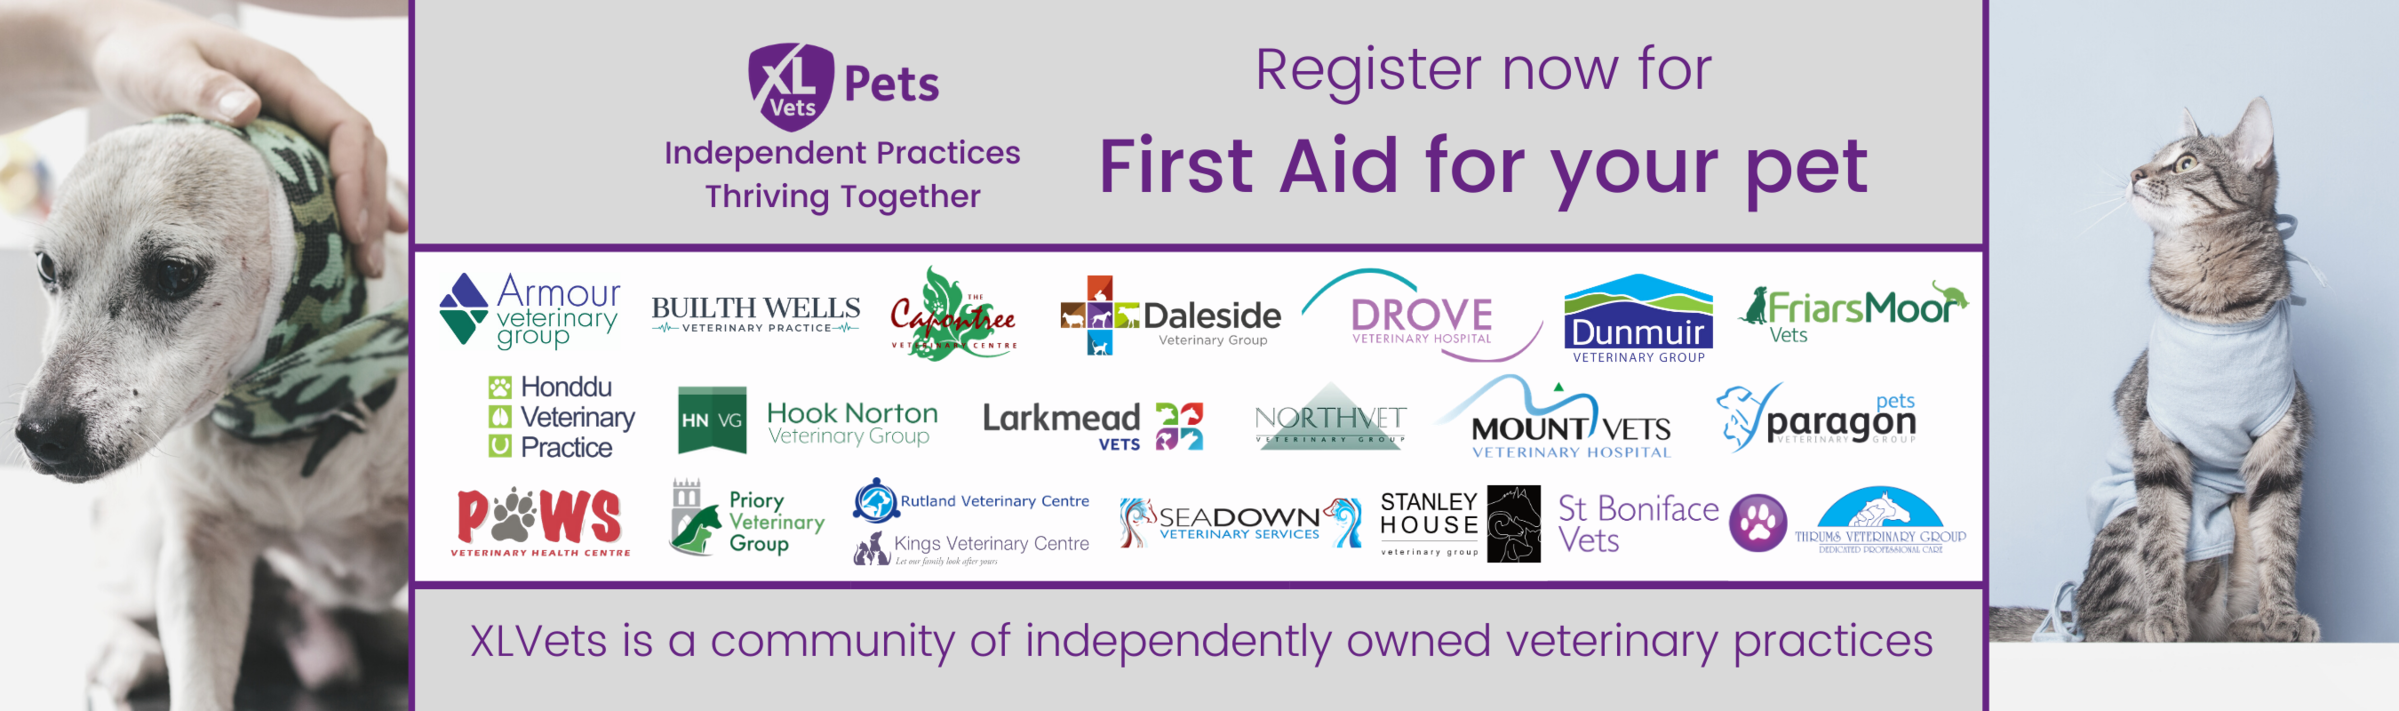 XLVets Small Animal Client Evening - First Aid for your Pet